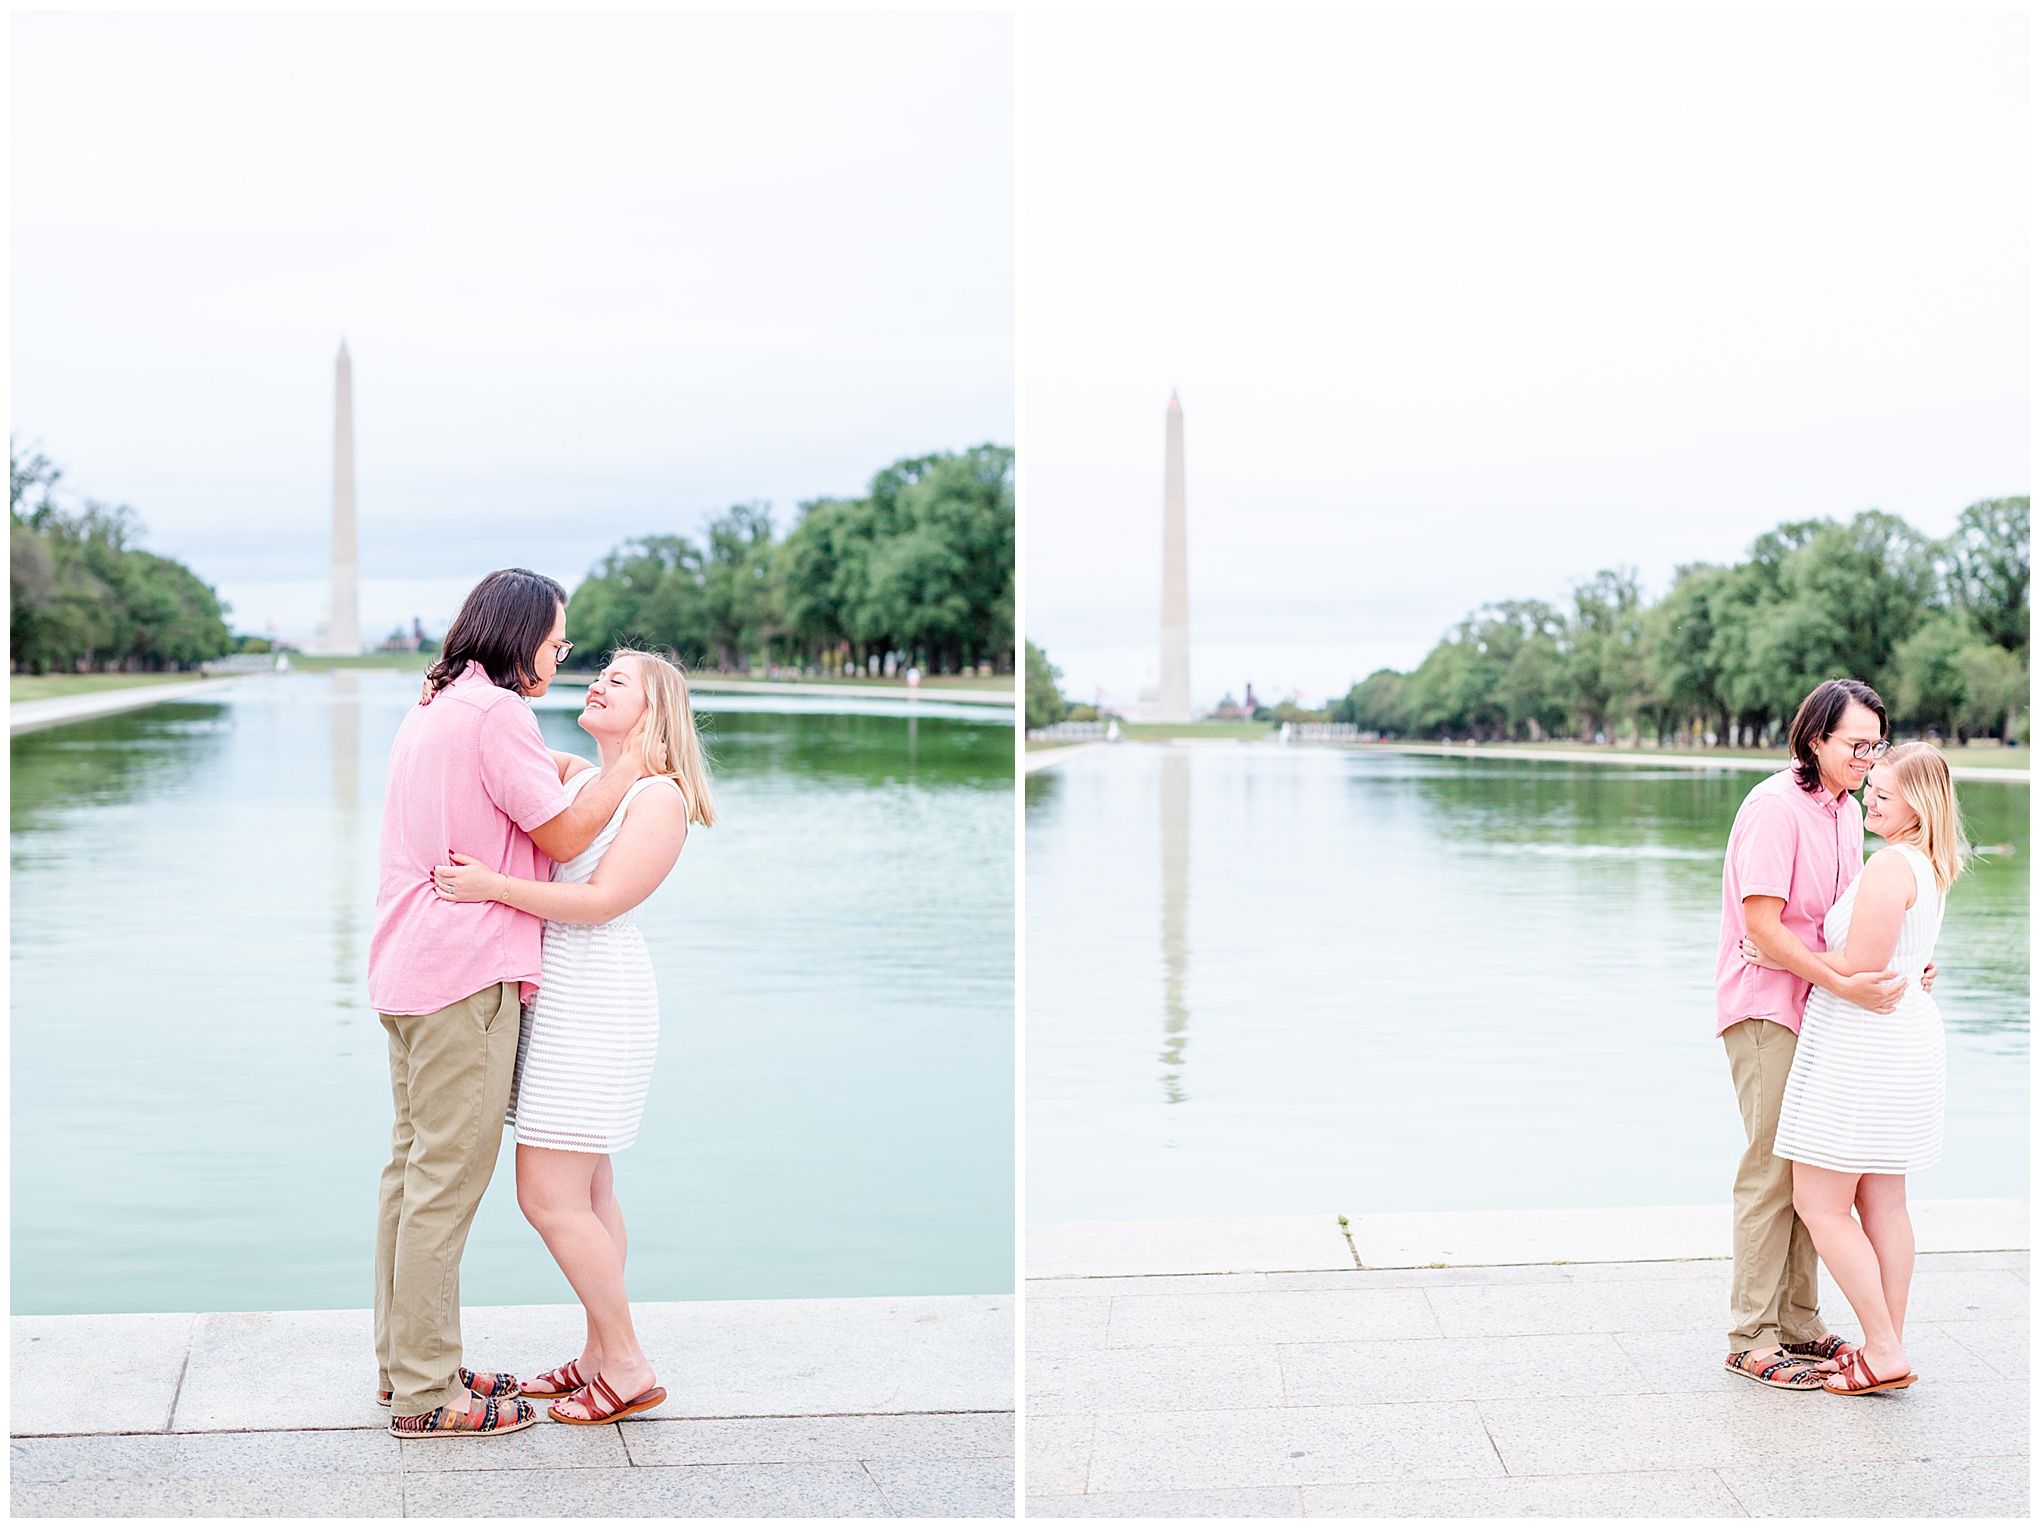 Lincoln Memorial suprise proposal, National Mall proposal, reflecting pool, Lincoln Memorial portraits, National Mall portraits, engagement photos, proposal portraits, surprise proposal photos, Rachel E.H. Photography, D.C. portraits, Virginia wedding photographer, Maryland wedding photographer, Baltimore wedding photographer, D.C. wedding photographer, pink and white aesthetic